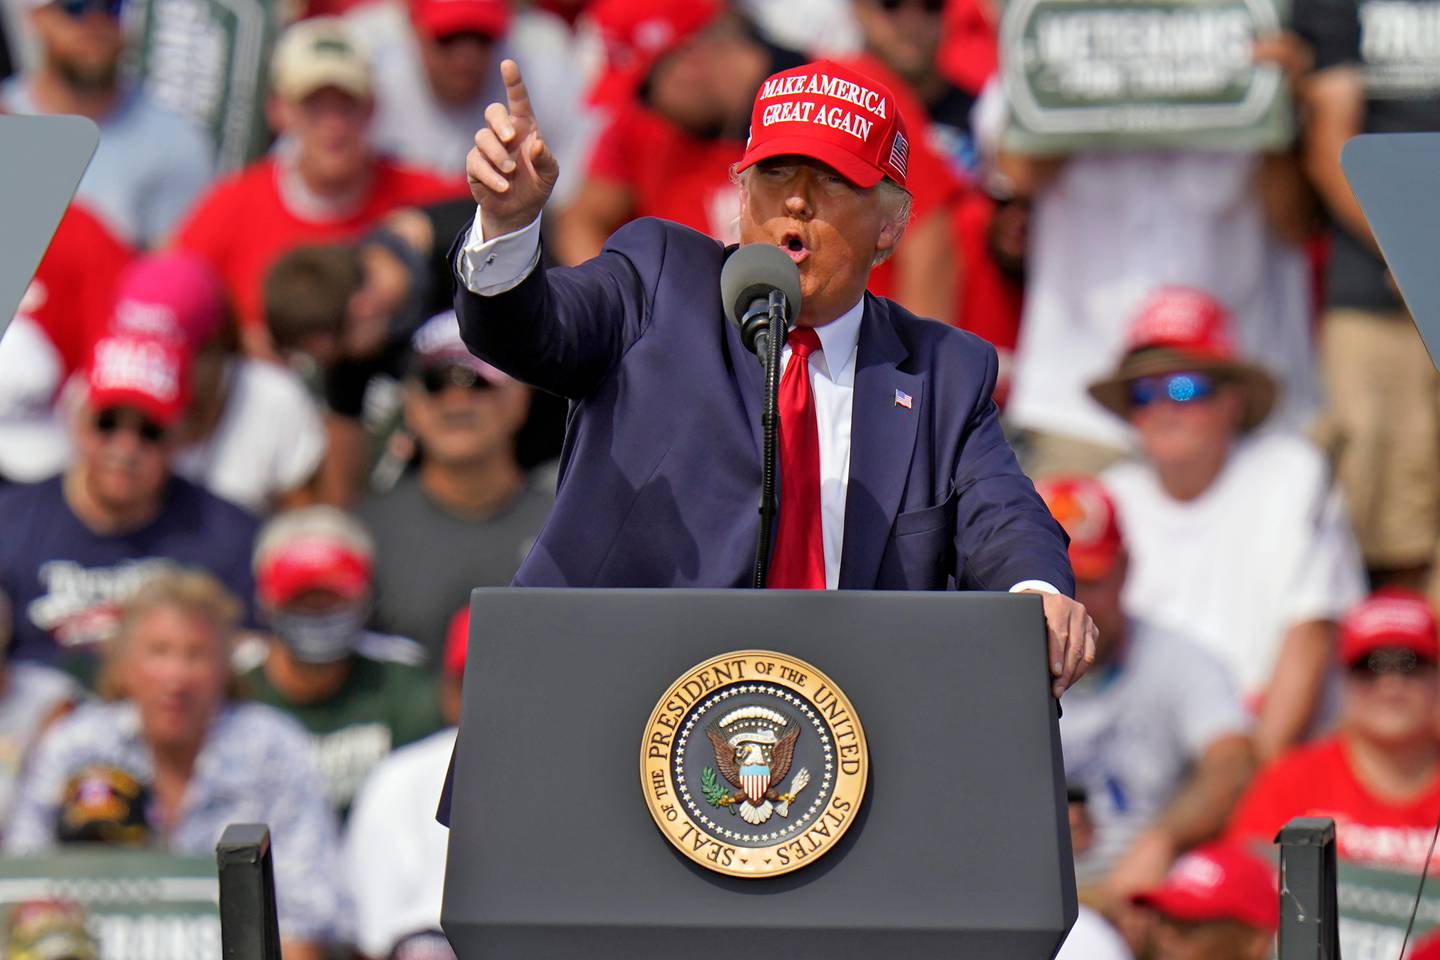 President Donald Trump gestures during a campaign rally Thursday, Oct. 29, 2020, in Tampa, Fla. (AP Photo/Chris O'Meara)